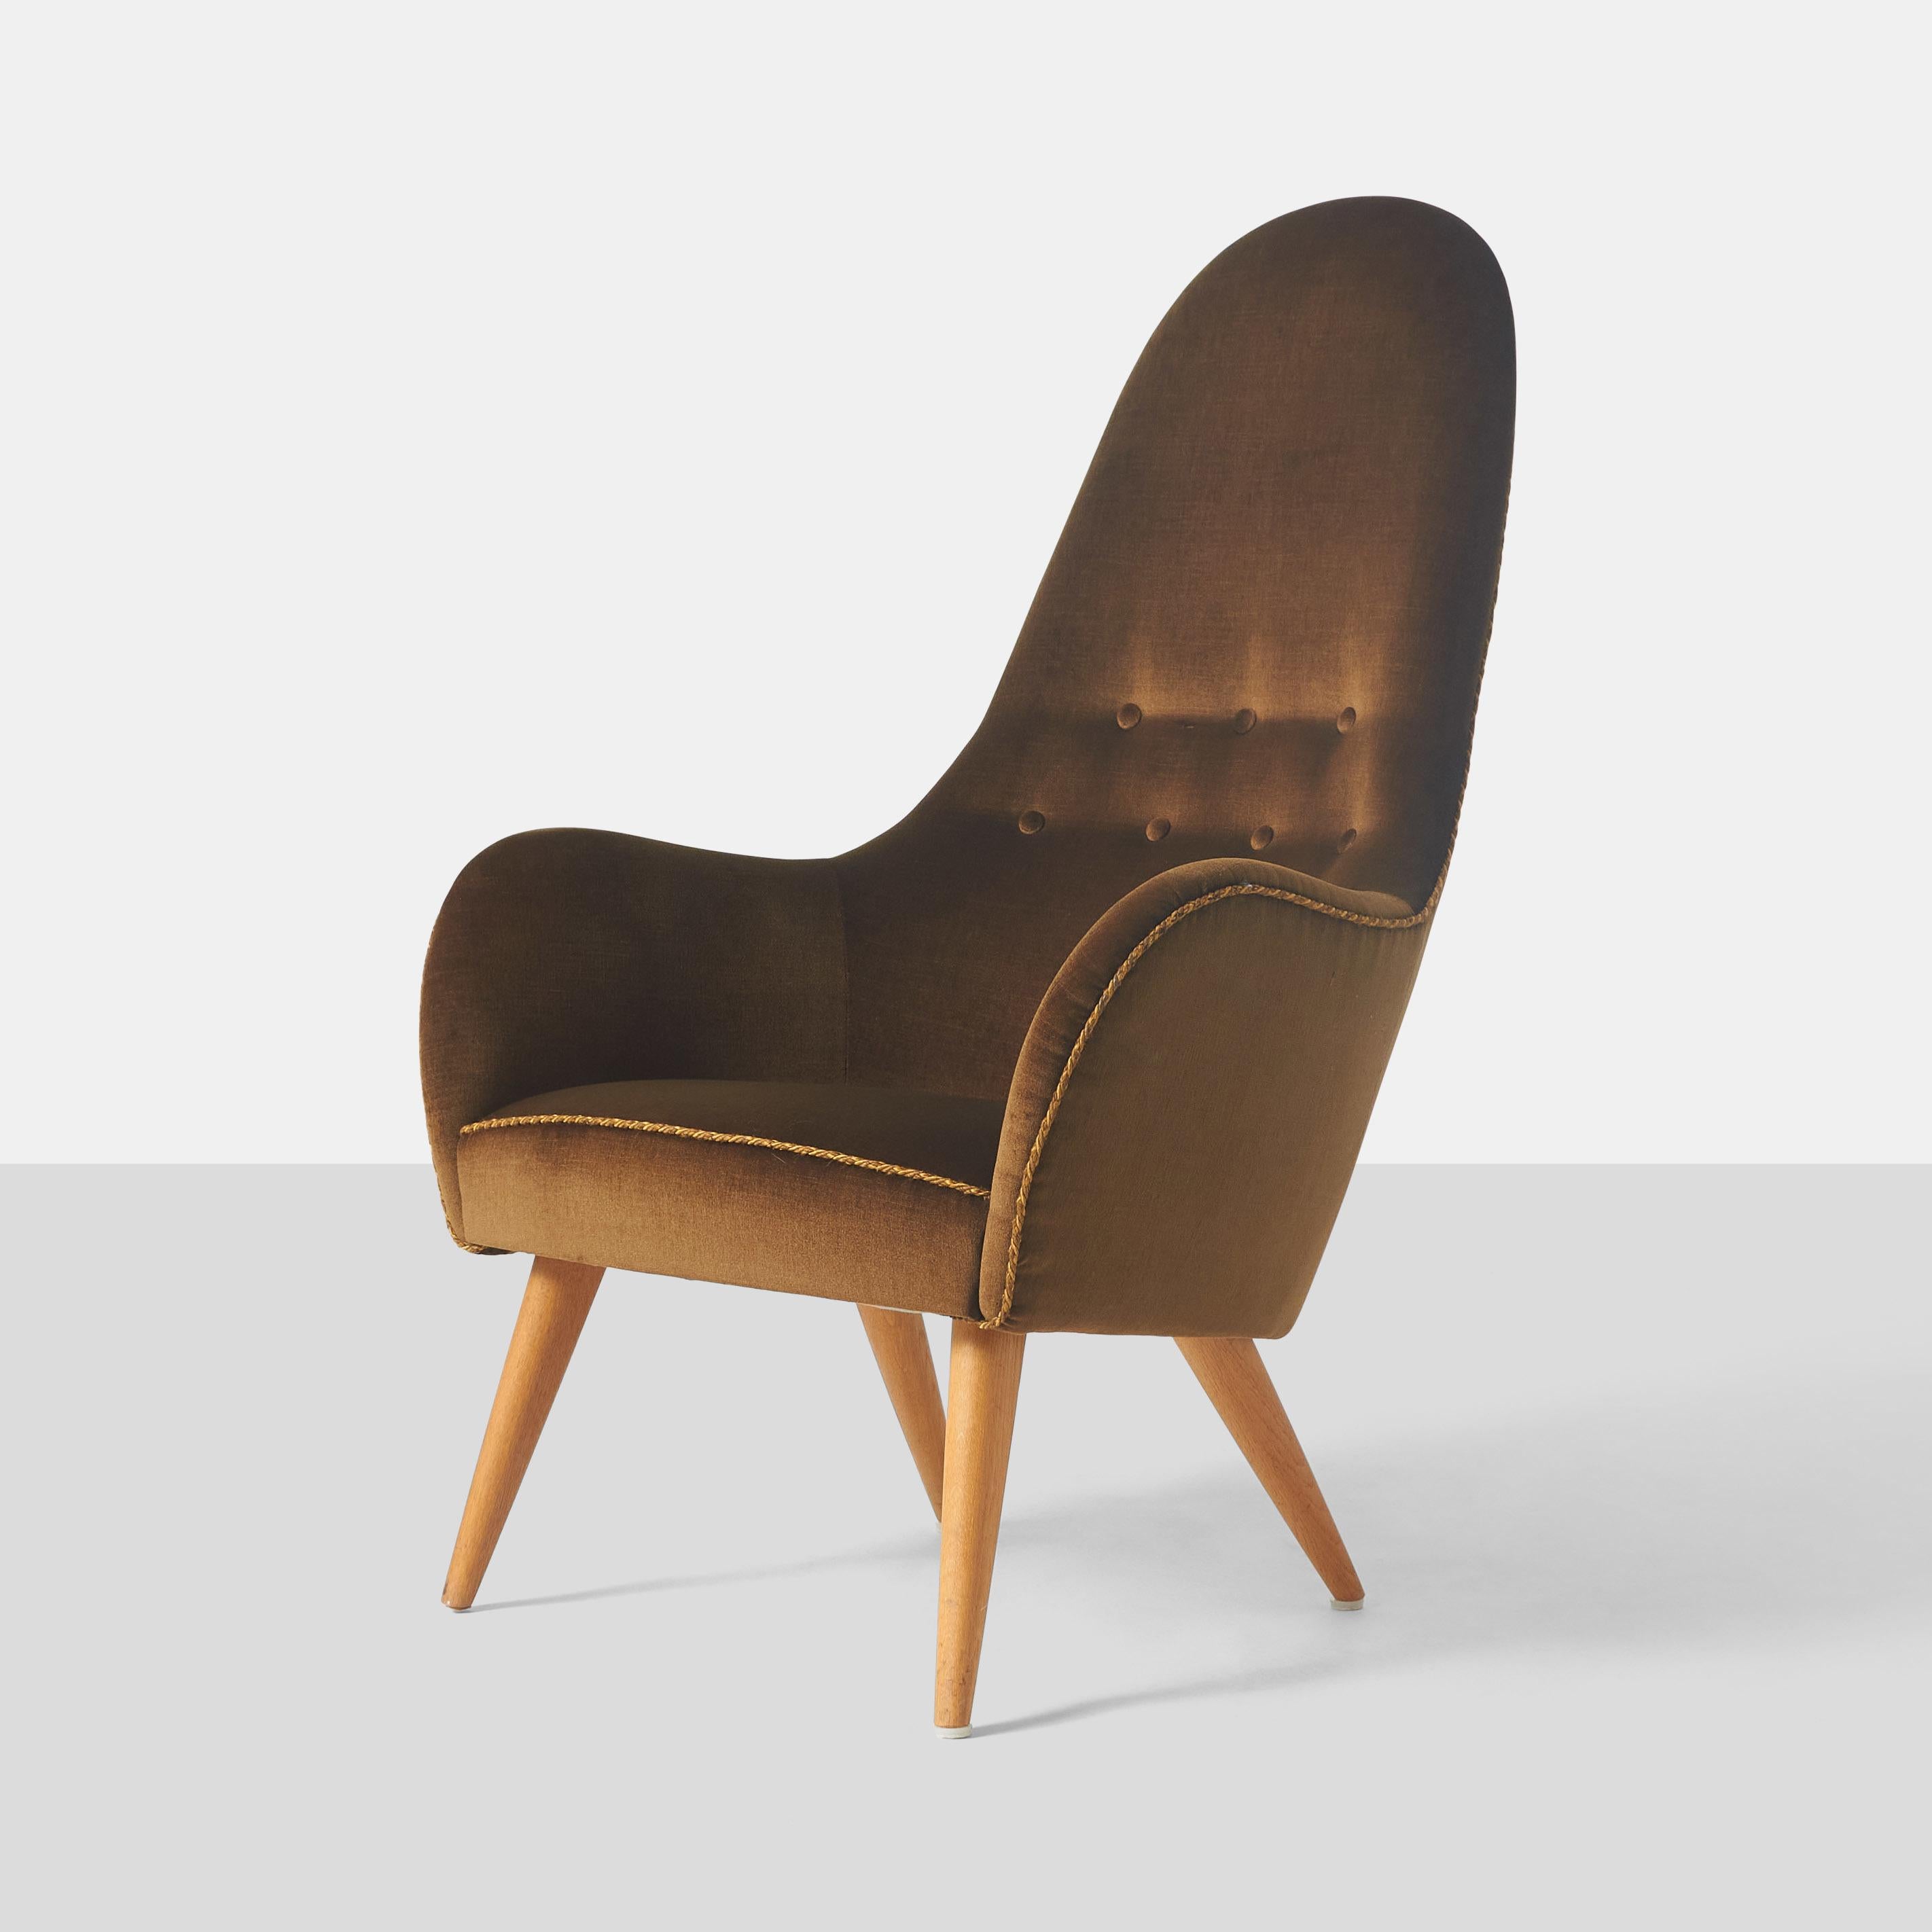 A tufted high back Adam lounge chair from the Paradise collection by Kerstin Horlin-Holmquist for Nordiska Kompaniet with beech legs and upholstered in a brown fabric and twisted cord trim detail along the seat and back edges.

A matching sofa and